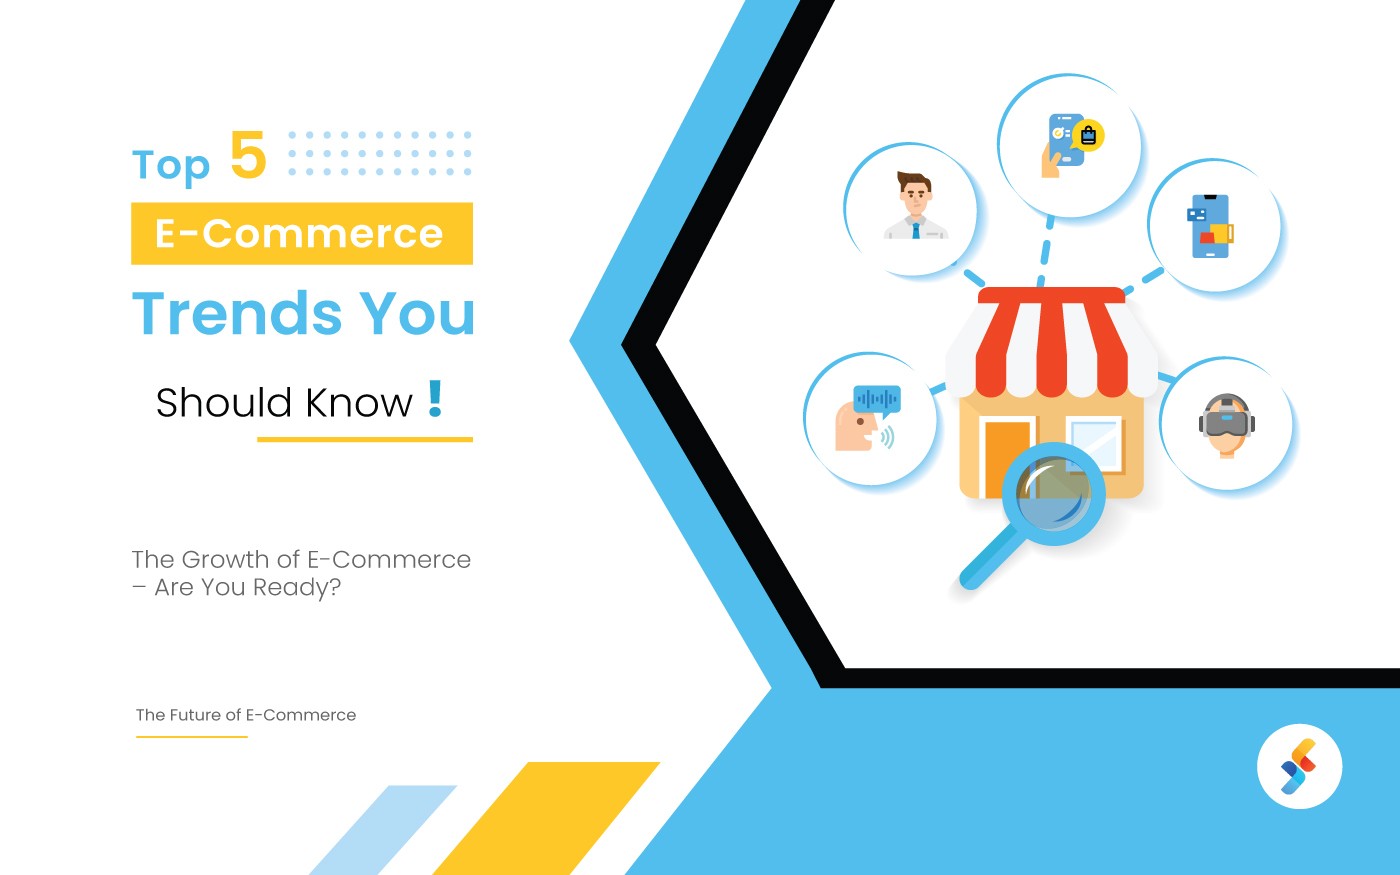 Top 5 E-commerce Trends You Should Know